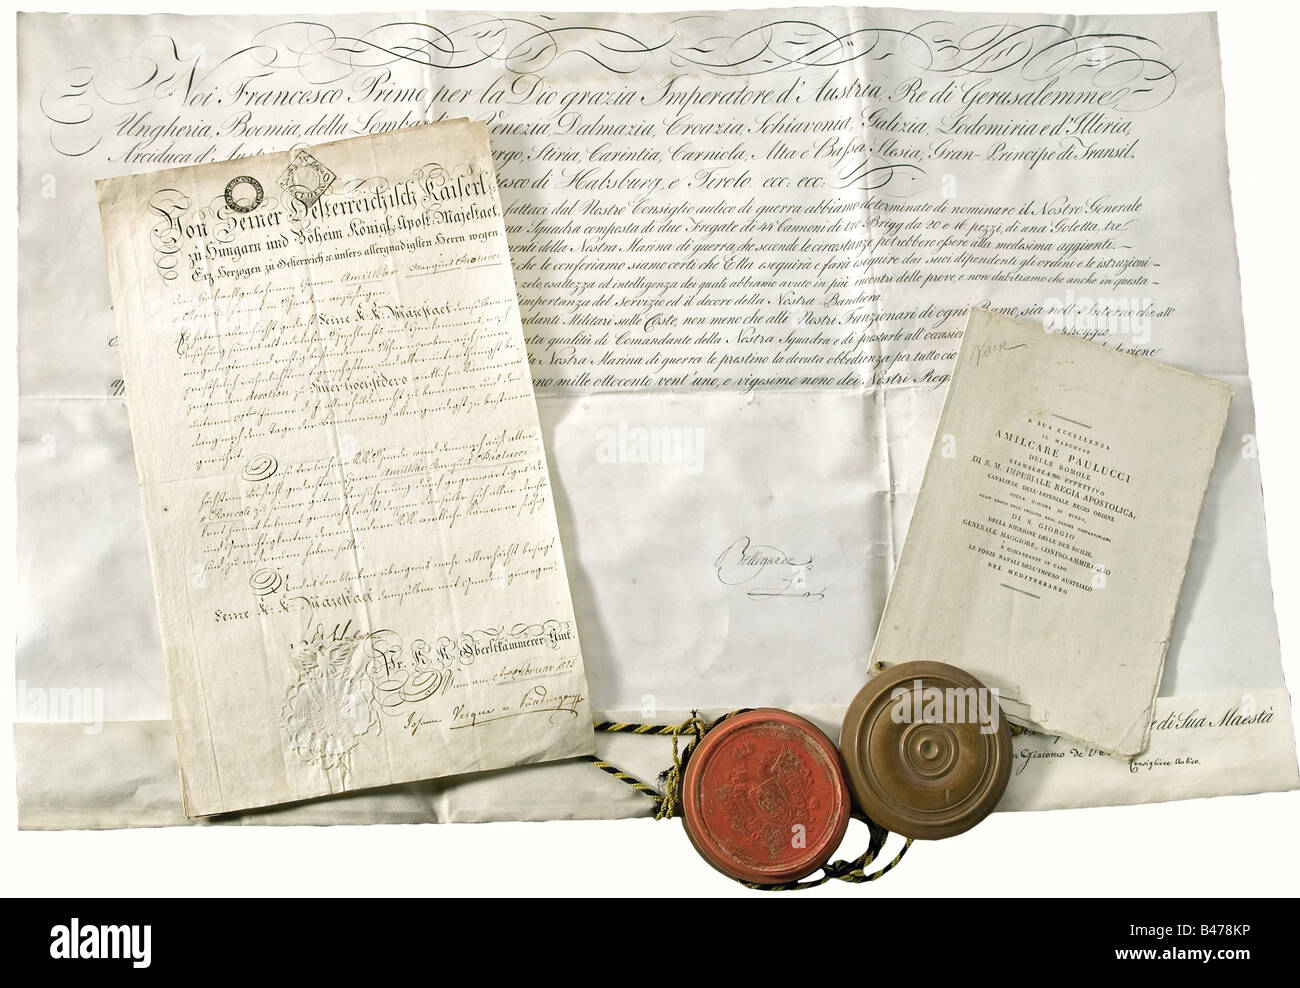 Admiral Hamilcar Paulucci., A large group of documents of the military career of the Commander of the Austrian Navy (1824 - 1844). A selection of the included documents: Appointment as Generalmajor (Brigadier)18.July 1814, grand certificate with the wafer seal and signature of Franz I. Certificate for the award of the Knight's Cross of the Order of the Iron Crown 17 July 1817. Grand Certificate appointing him Commander of the Mediterranean Fleet on 12 February 1821, parchment with Bellegarde's signature and imperial seal in a wooden capsule. Grand Certificate a, Stock Photo